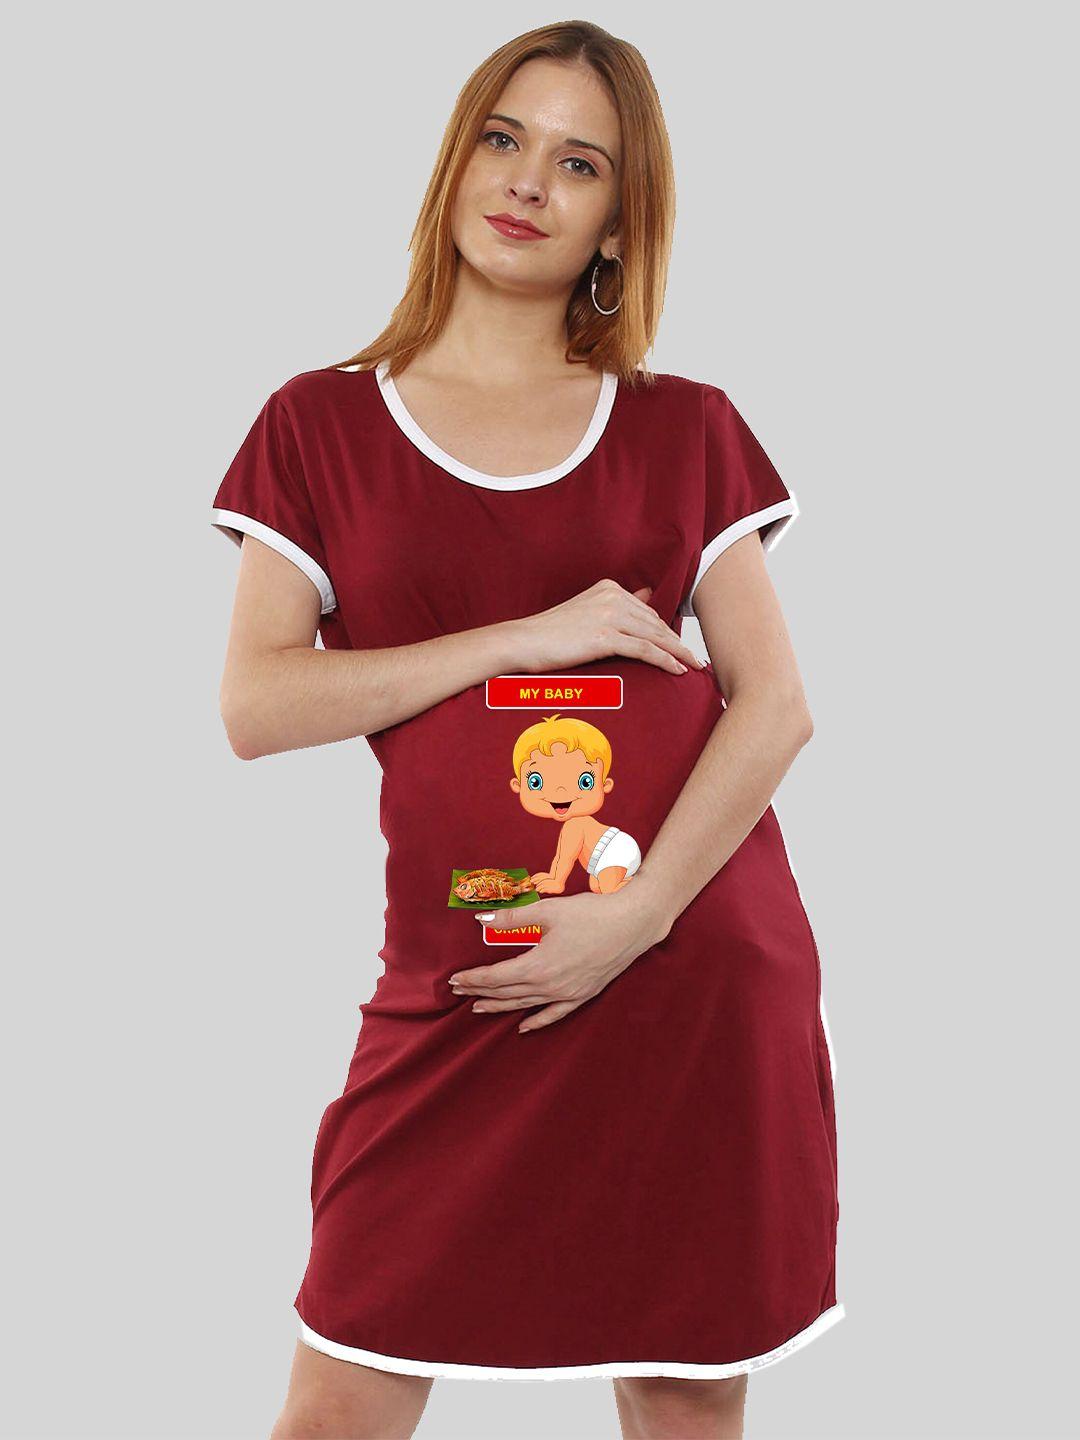 sillyboom printed round neck cotton maternity t-shirt dress